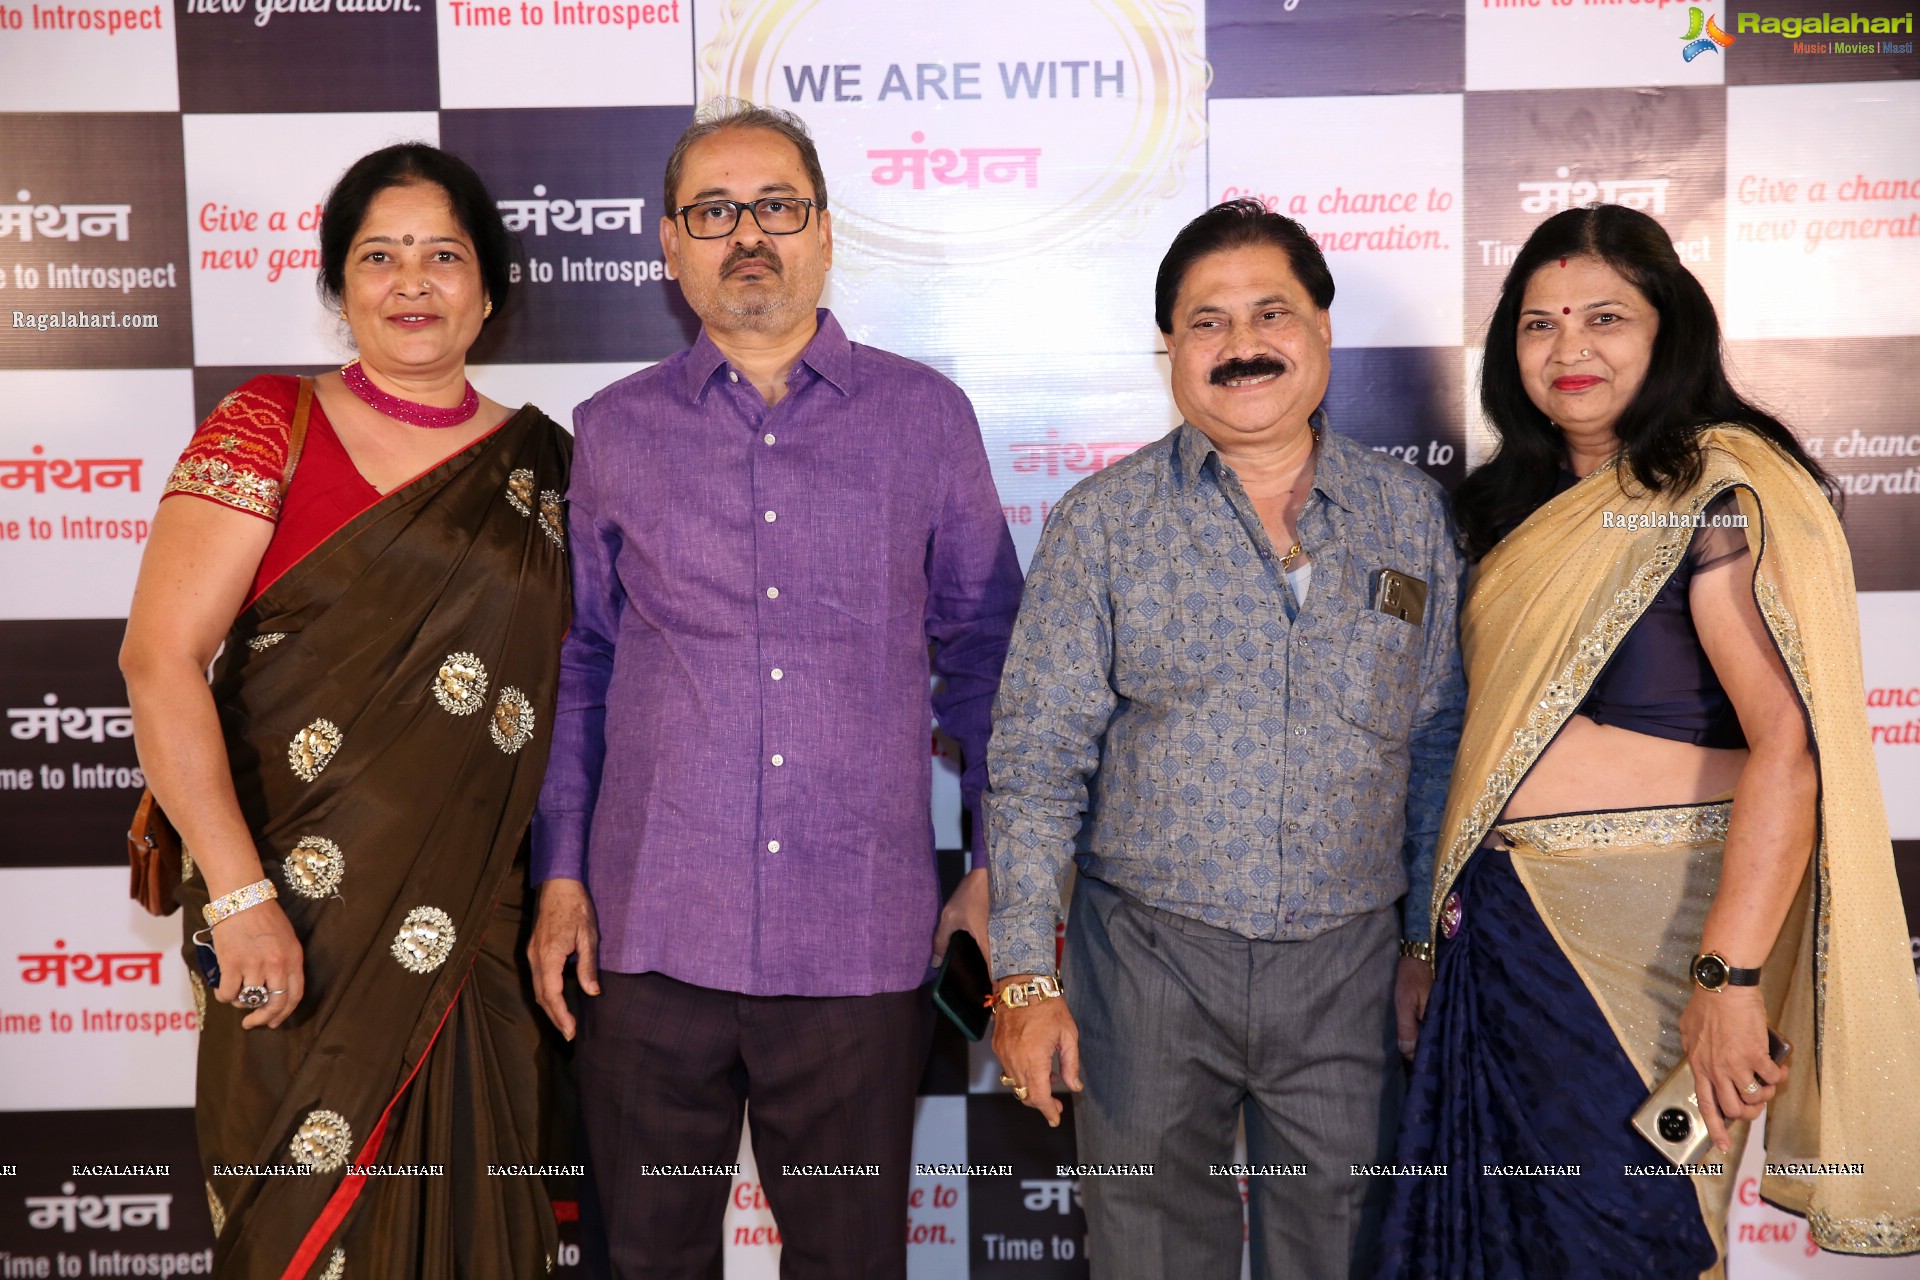 Team Manthan Celebrates New Year Party 2021 at Classic Gardens